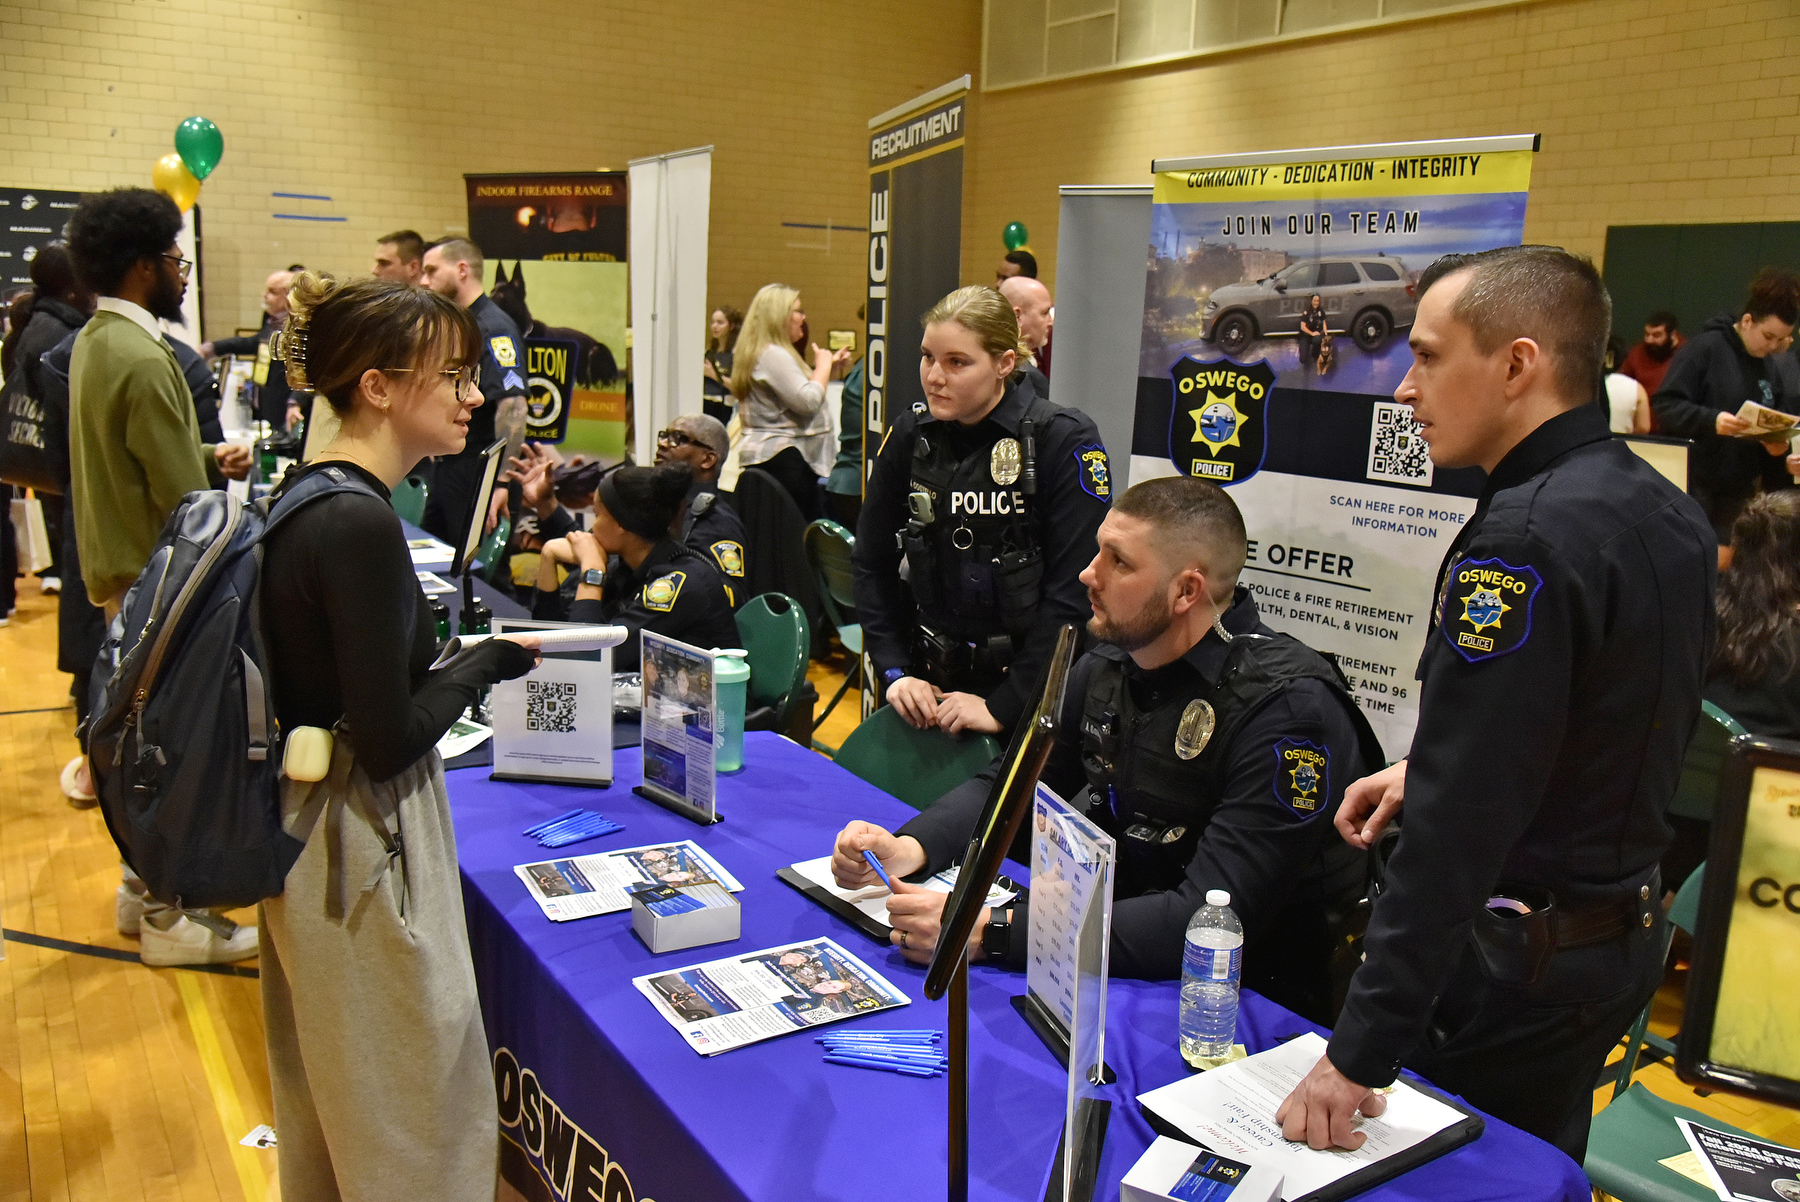 Oswego students networked with over 100 employers and professionals at the Spring 2024 Career and Internship Fair. The event hosted by Career Services was held March 6 in the Swetman Gym in Marano Campus Center. Pictured, senior criminal justice major Emma Monaghan talks with Officers from the Oswego Police Department.